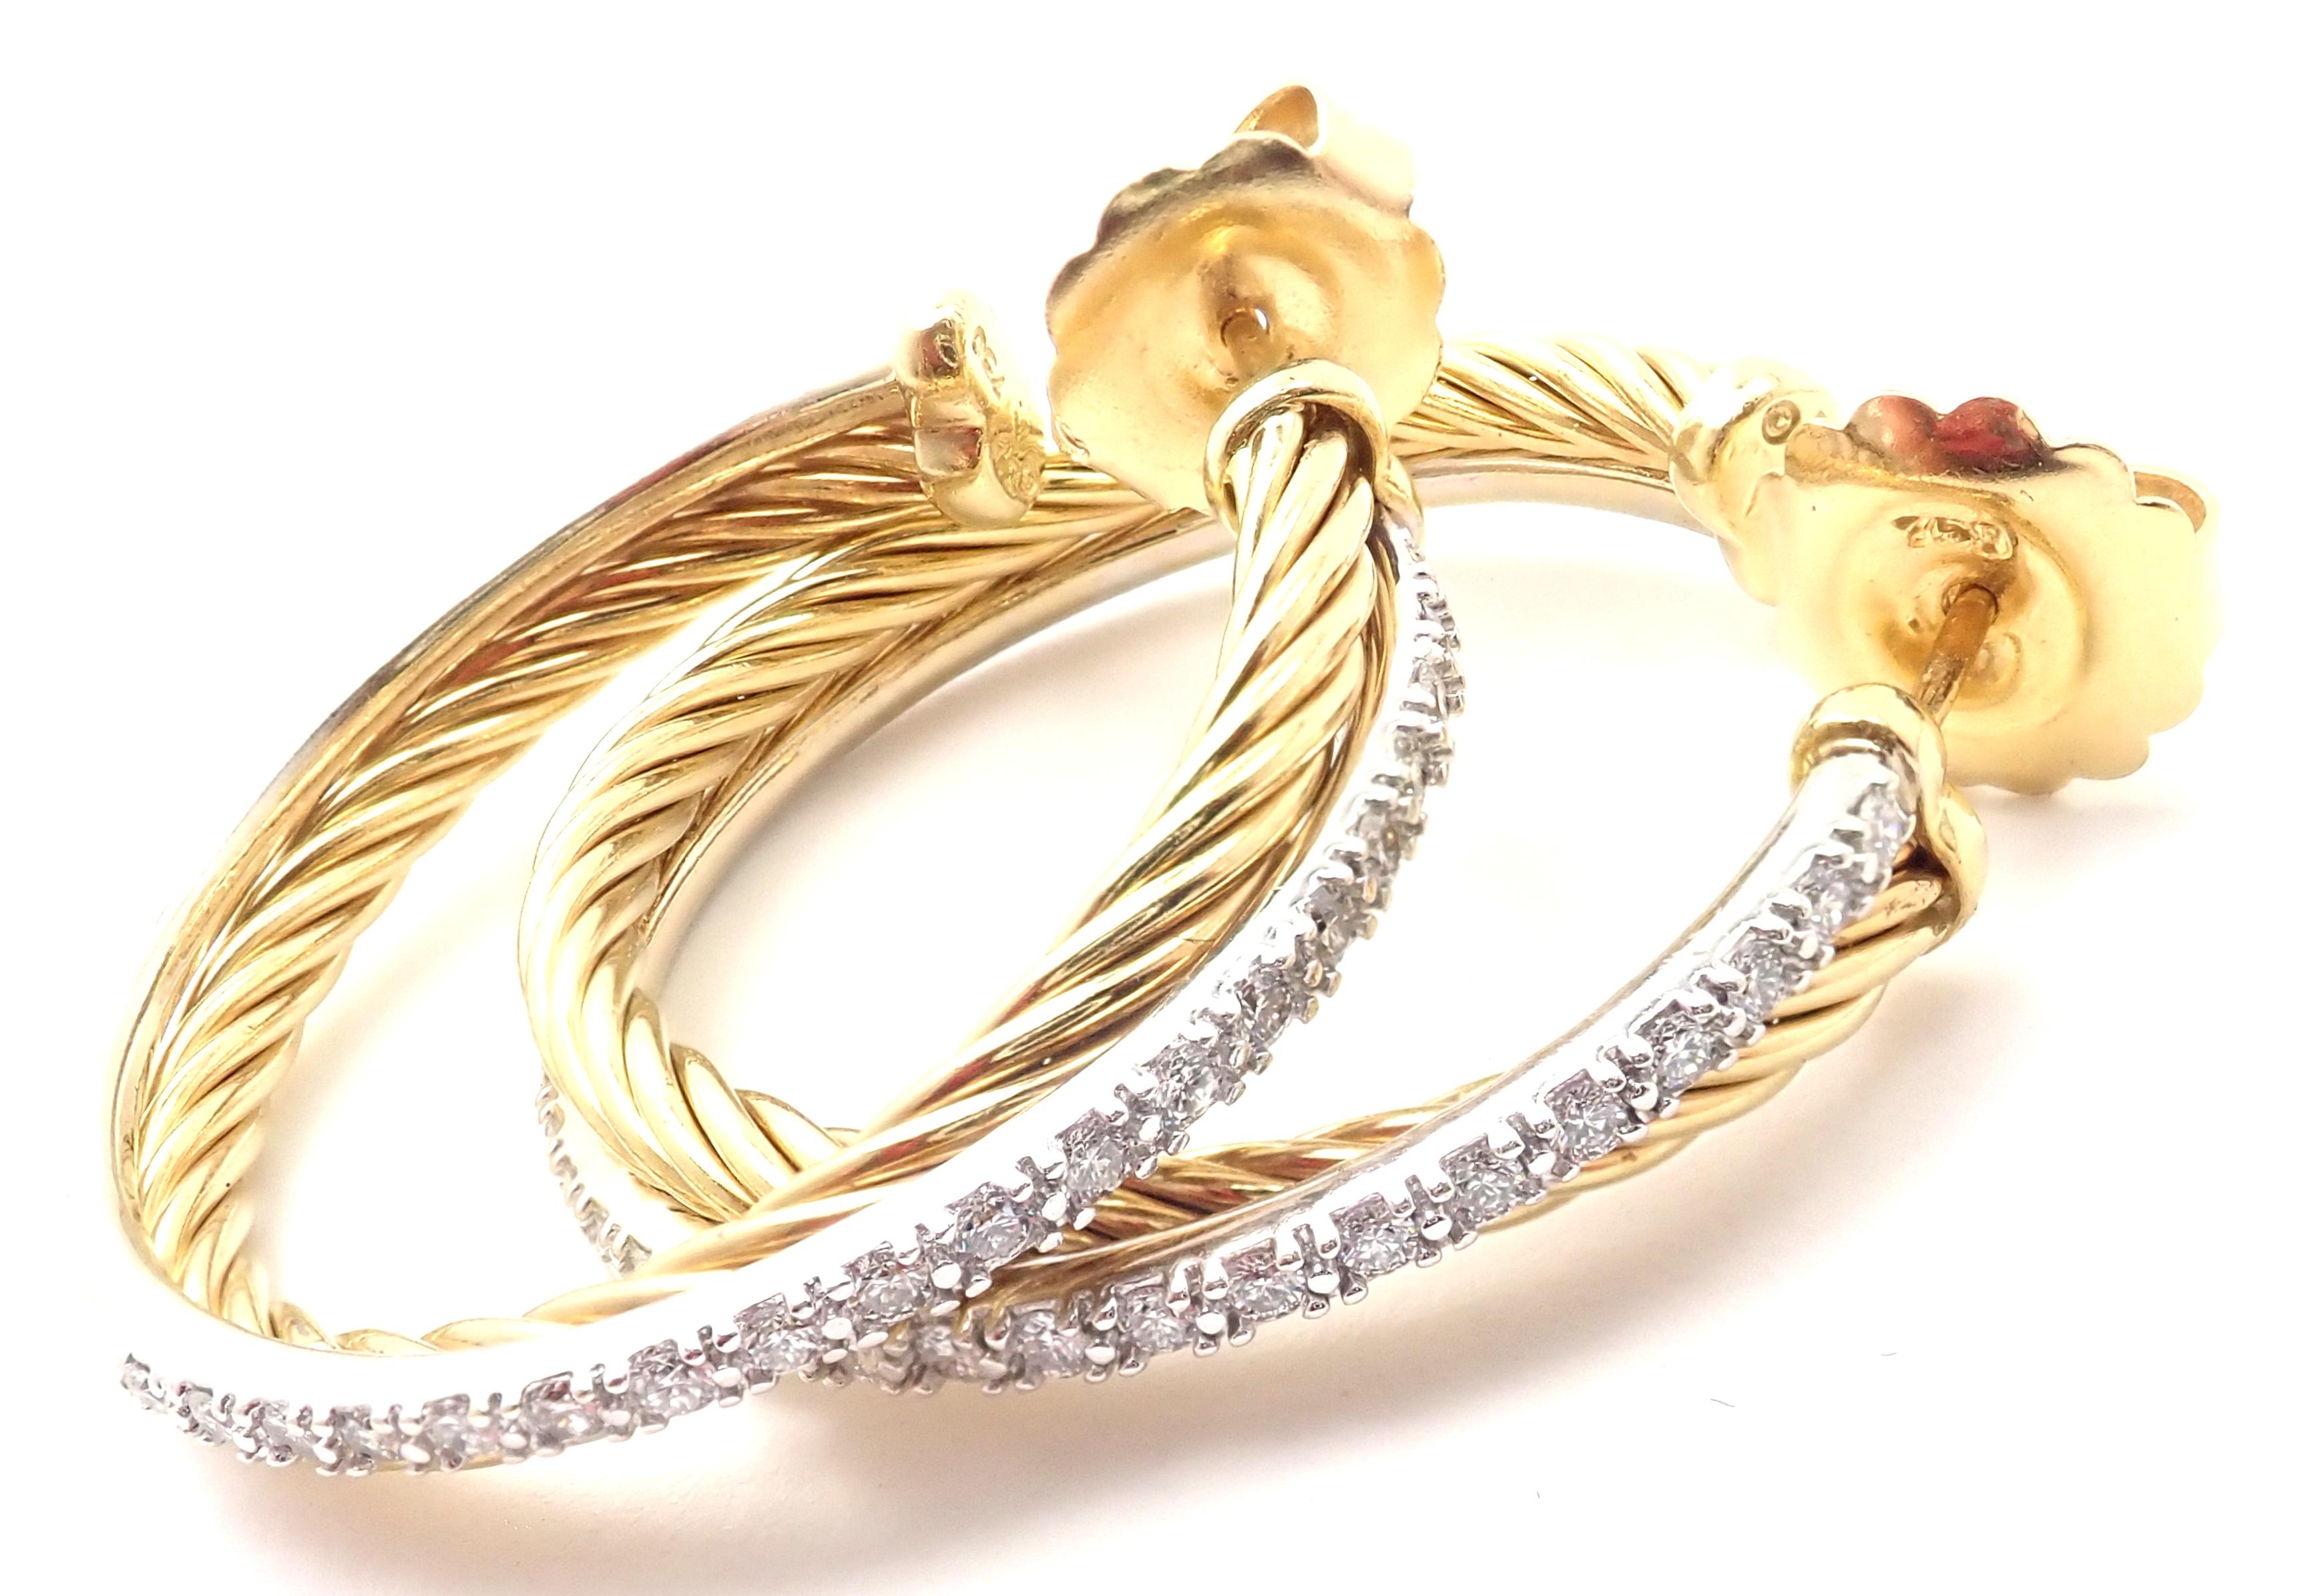 18k Yellow Gold Diamond Crossover Medium Size Hoop Earrings by David Yurman.
With 38 round brilliant cut diamonds SI1 clarity, G color total weight approx. .50ct
Details:
Measurements: 31mm
Weight: 13.5 grams
Stamped Hallmarks: DY 750
*Free Shipping